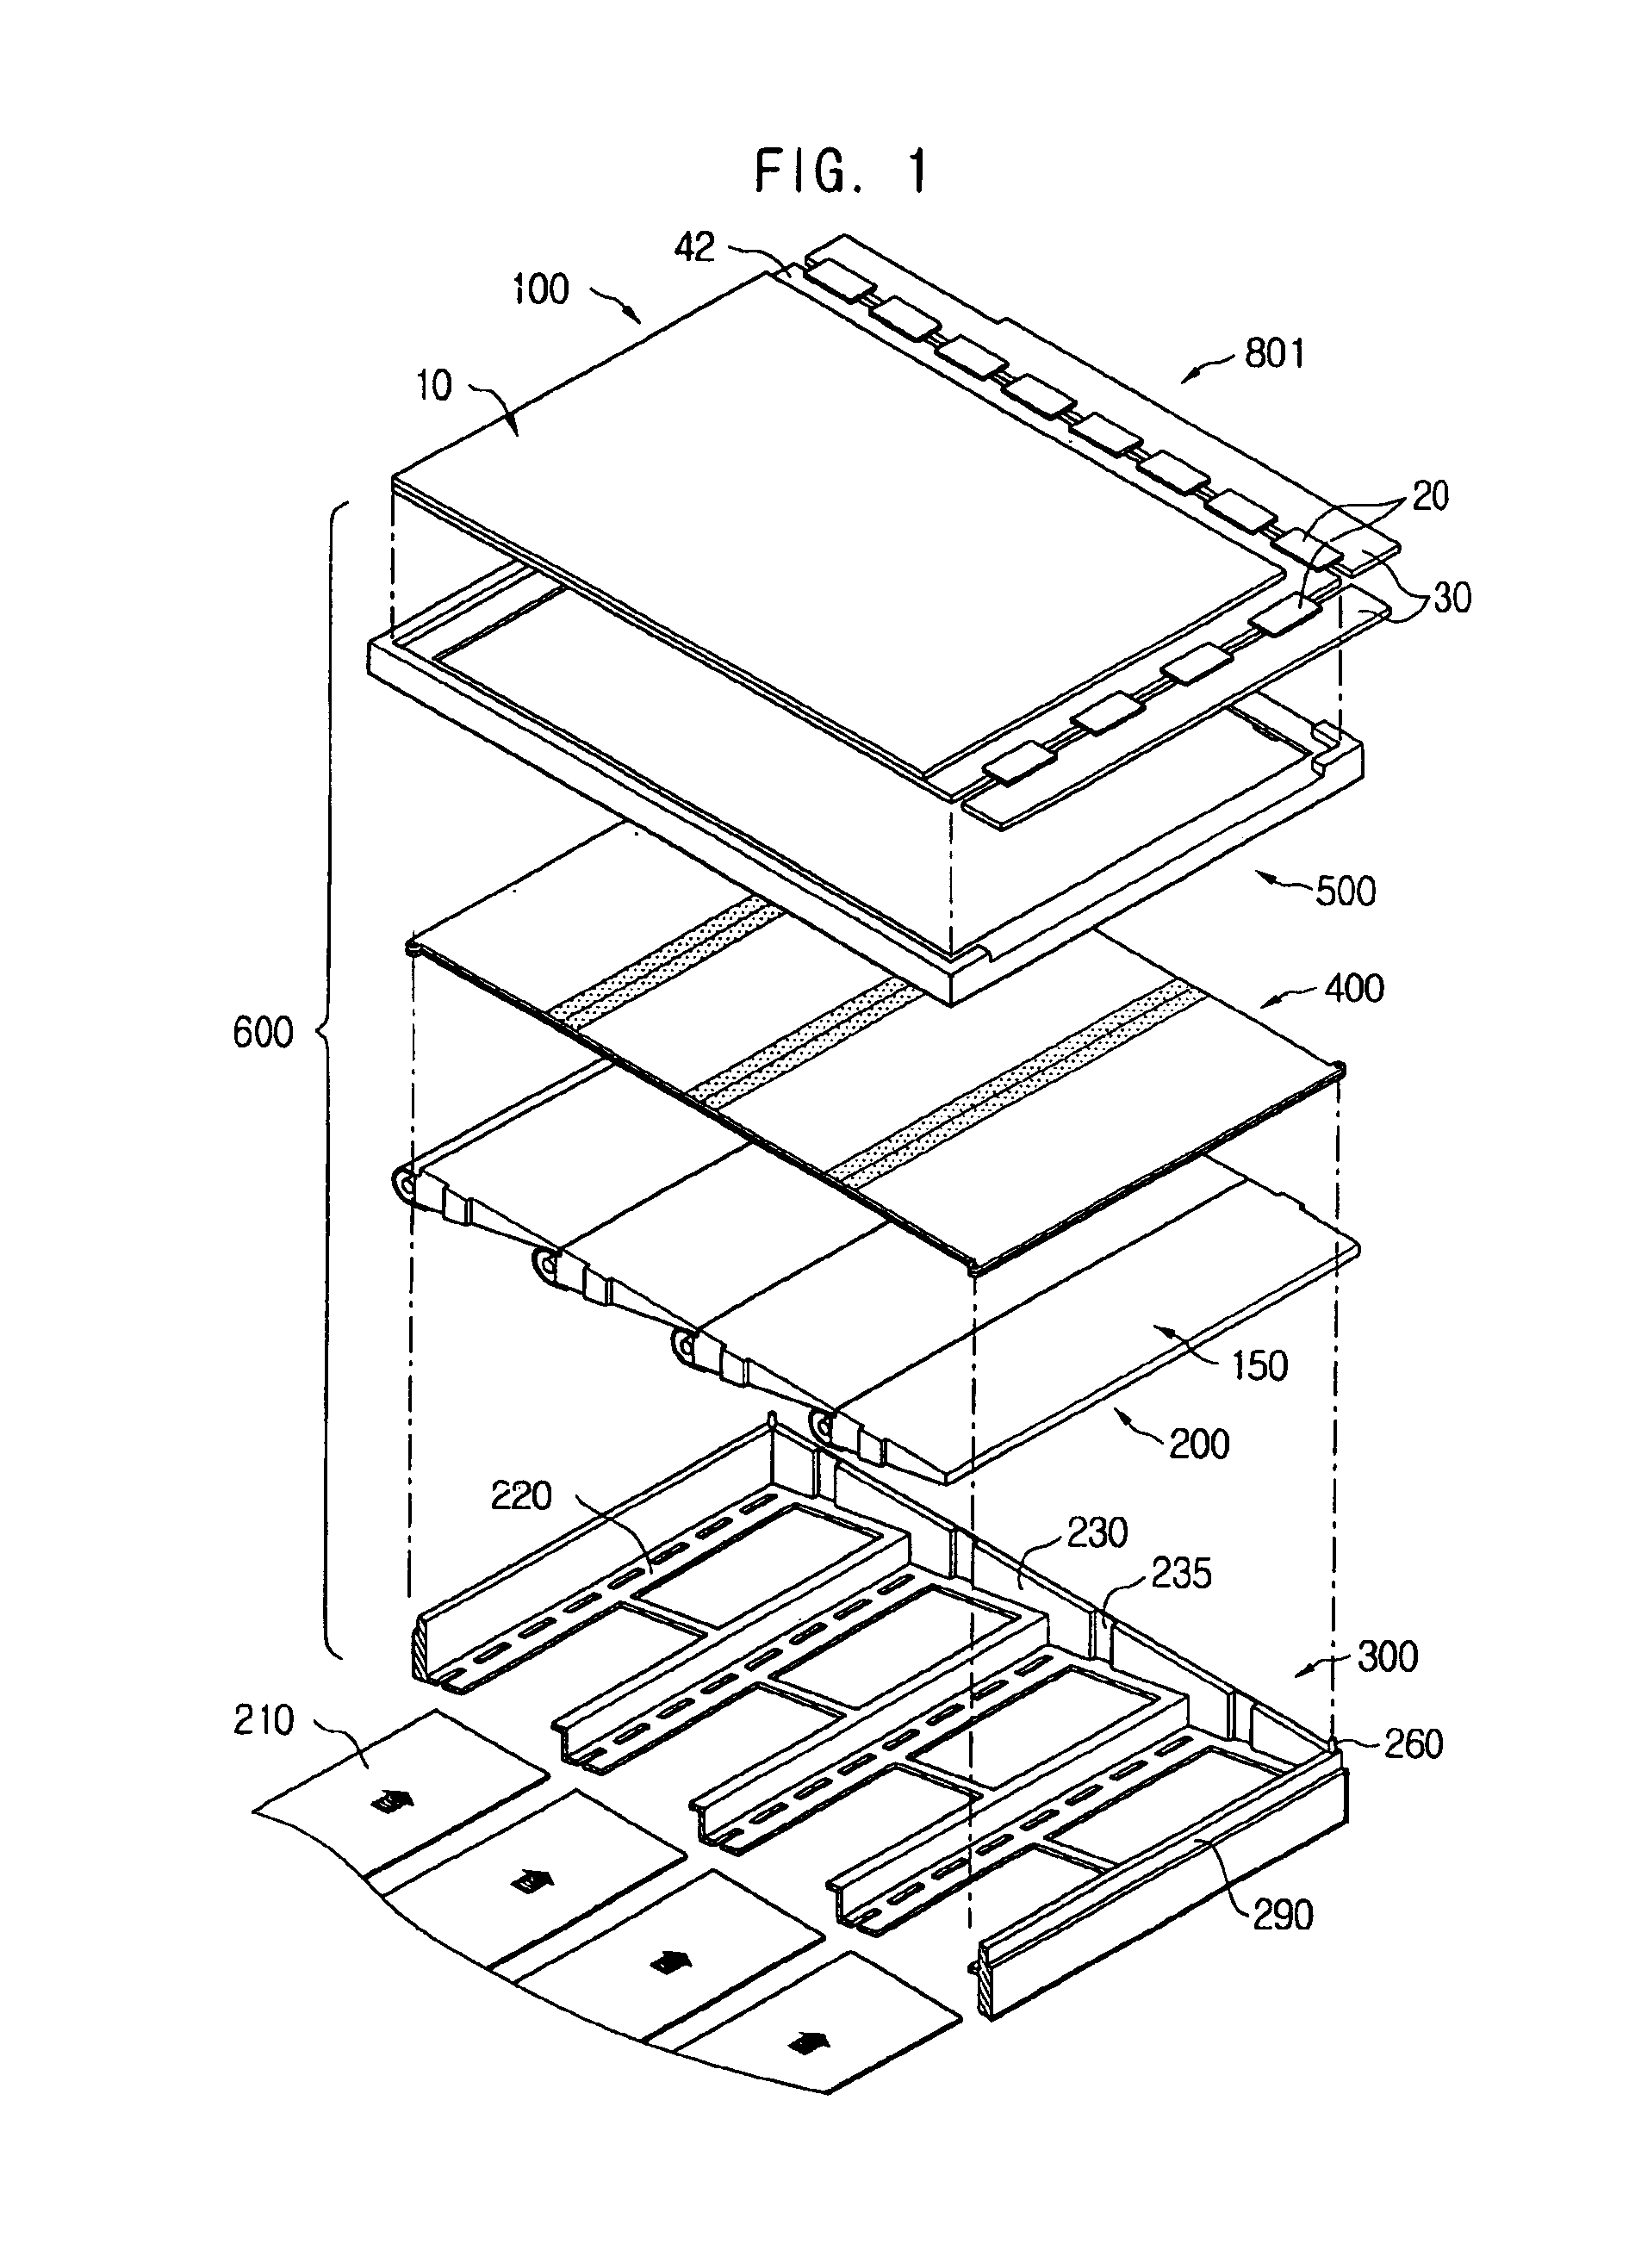 Liquid crystal display including at least two light guiding plates abutting each other